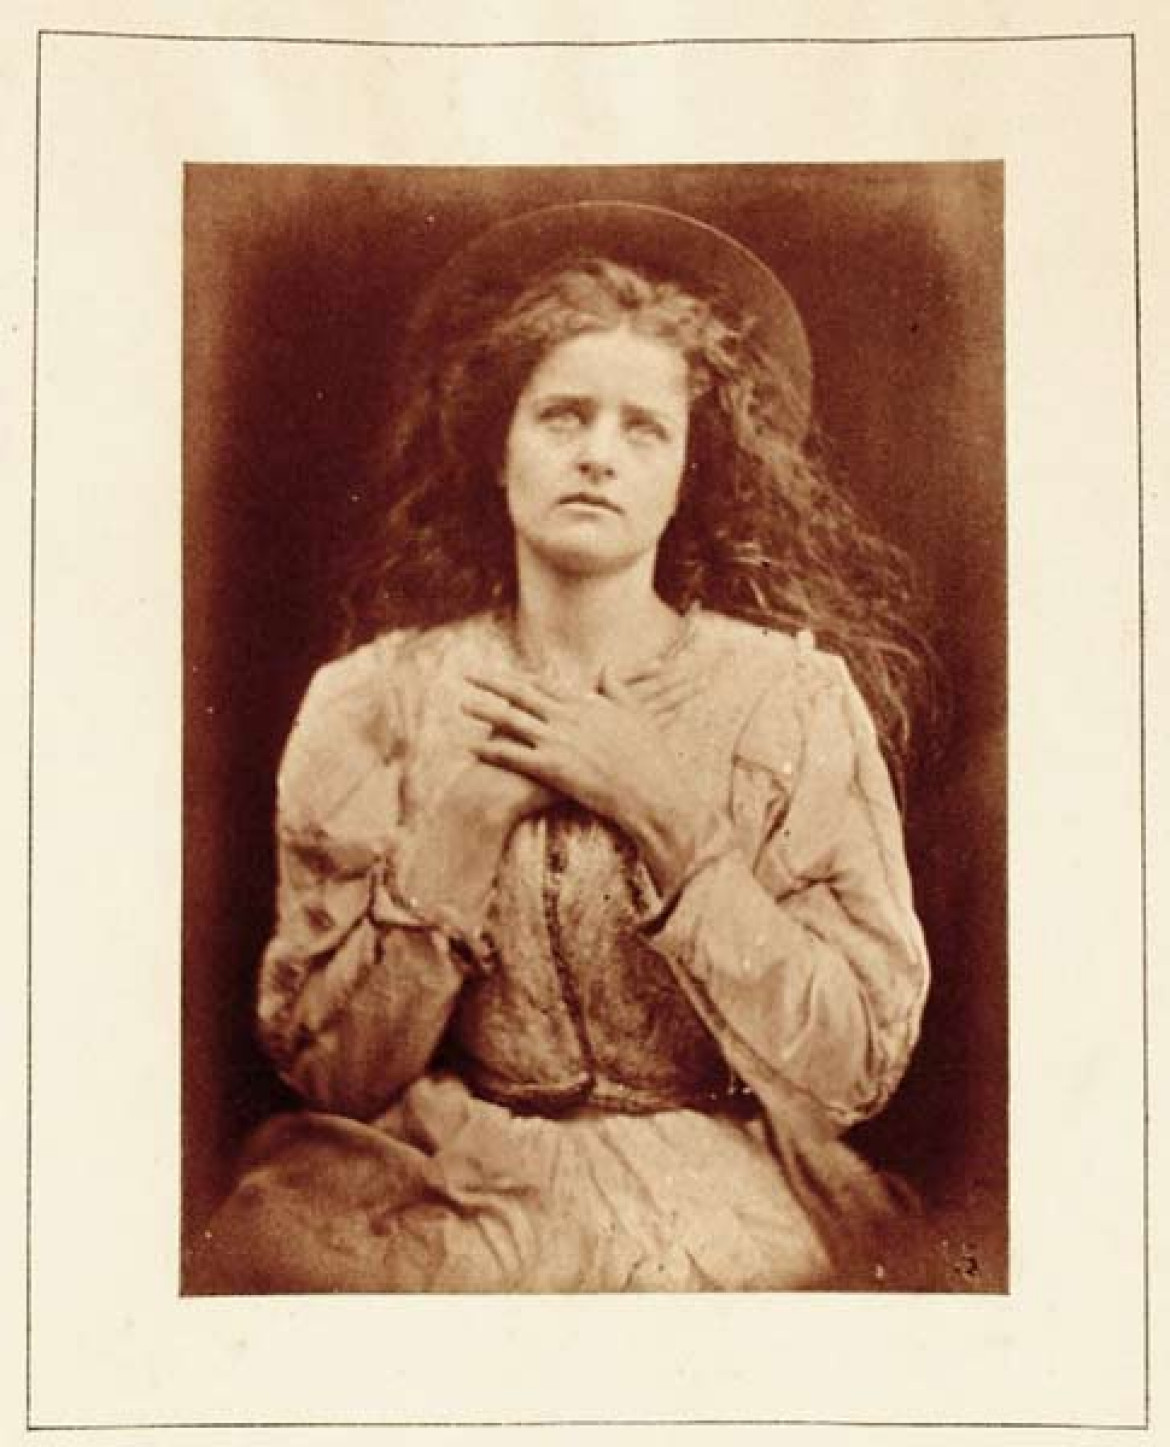 fot. Julia Margaret Cameron "The May Ouinne (dying)" z wystawy "Idylls of the King"